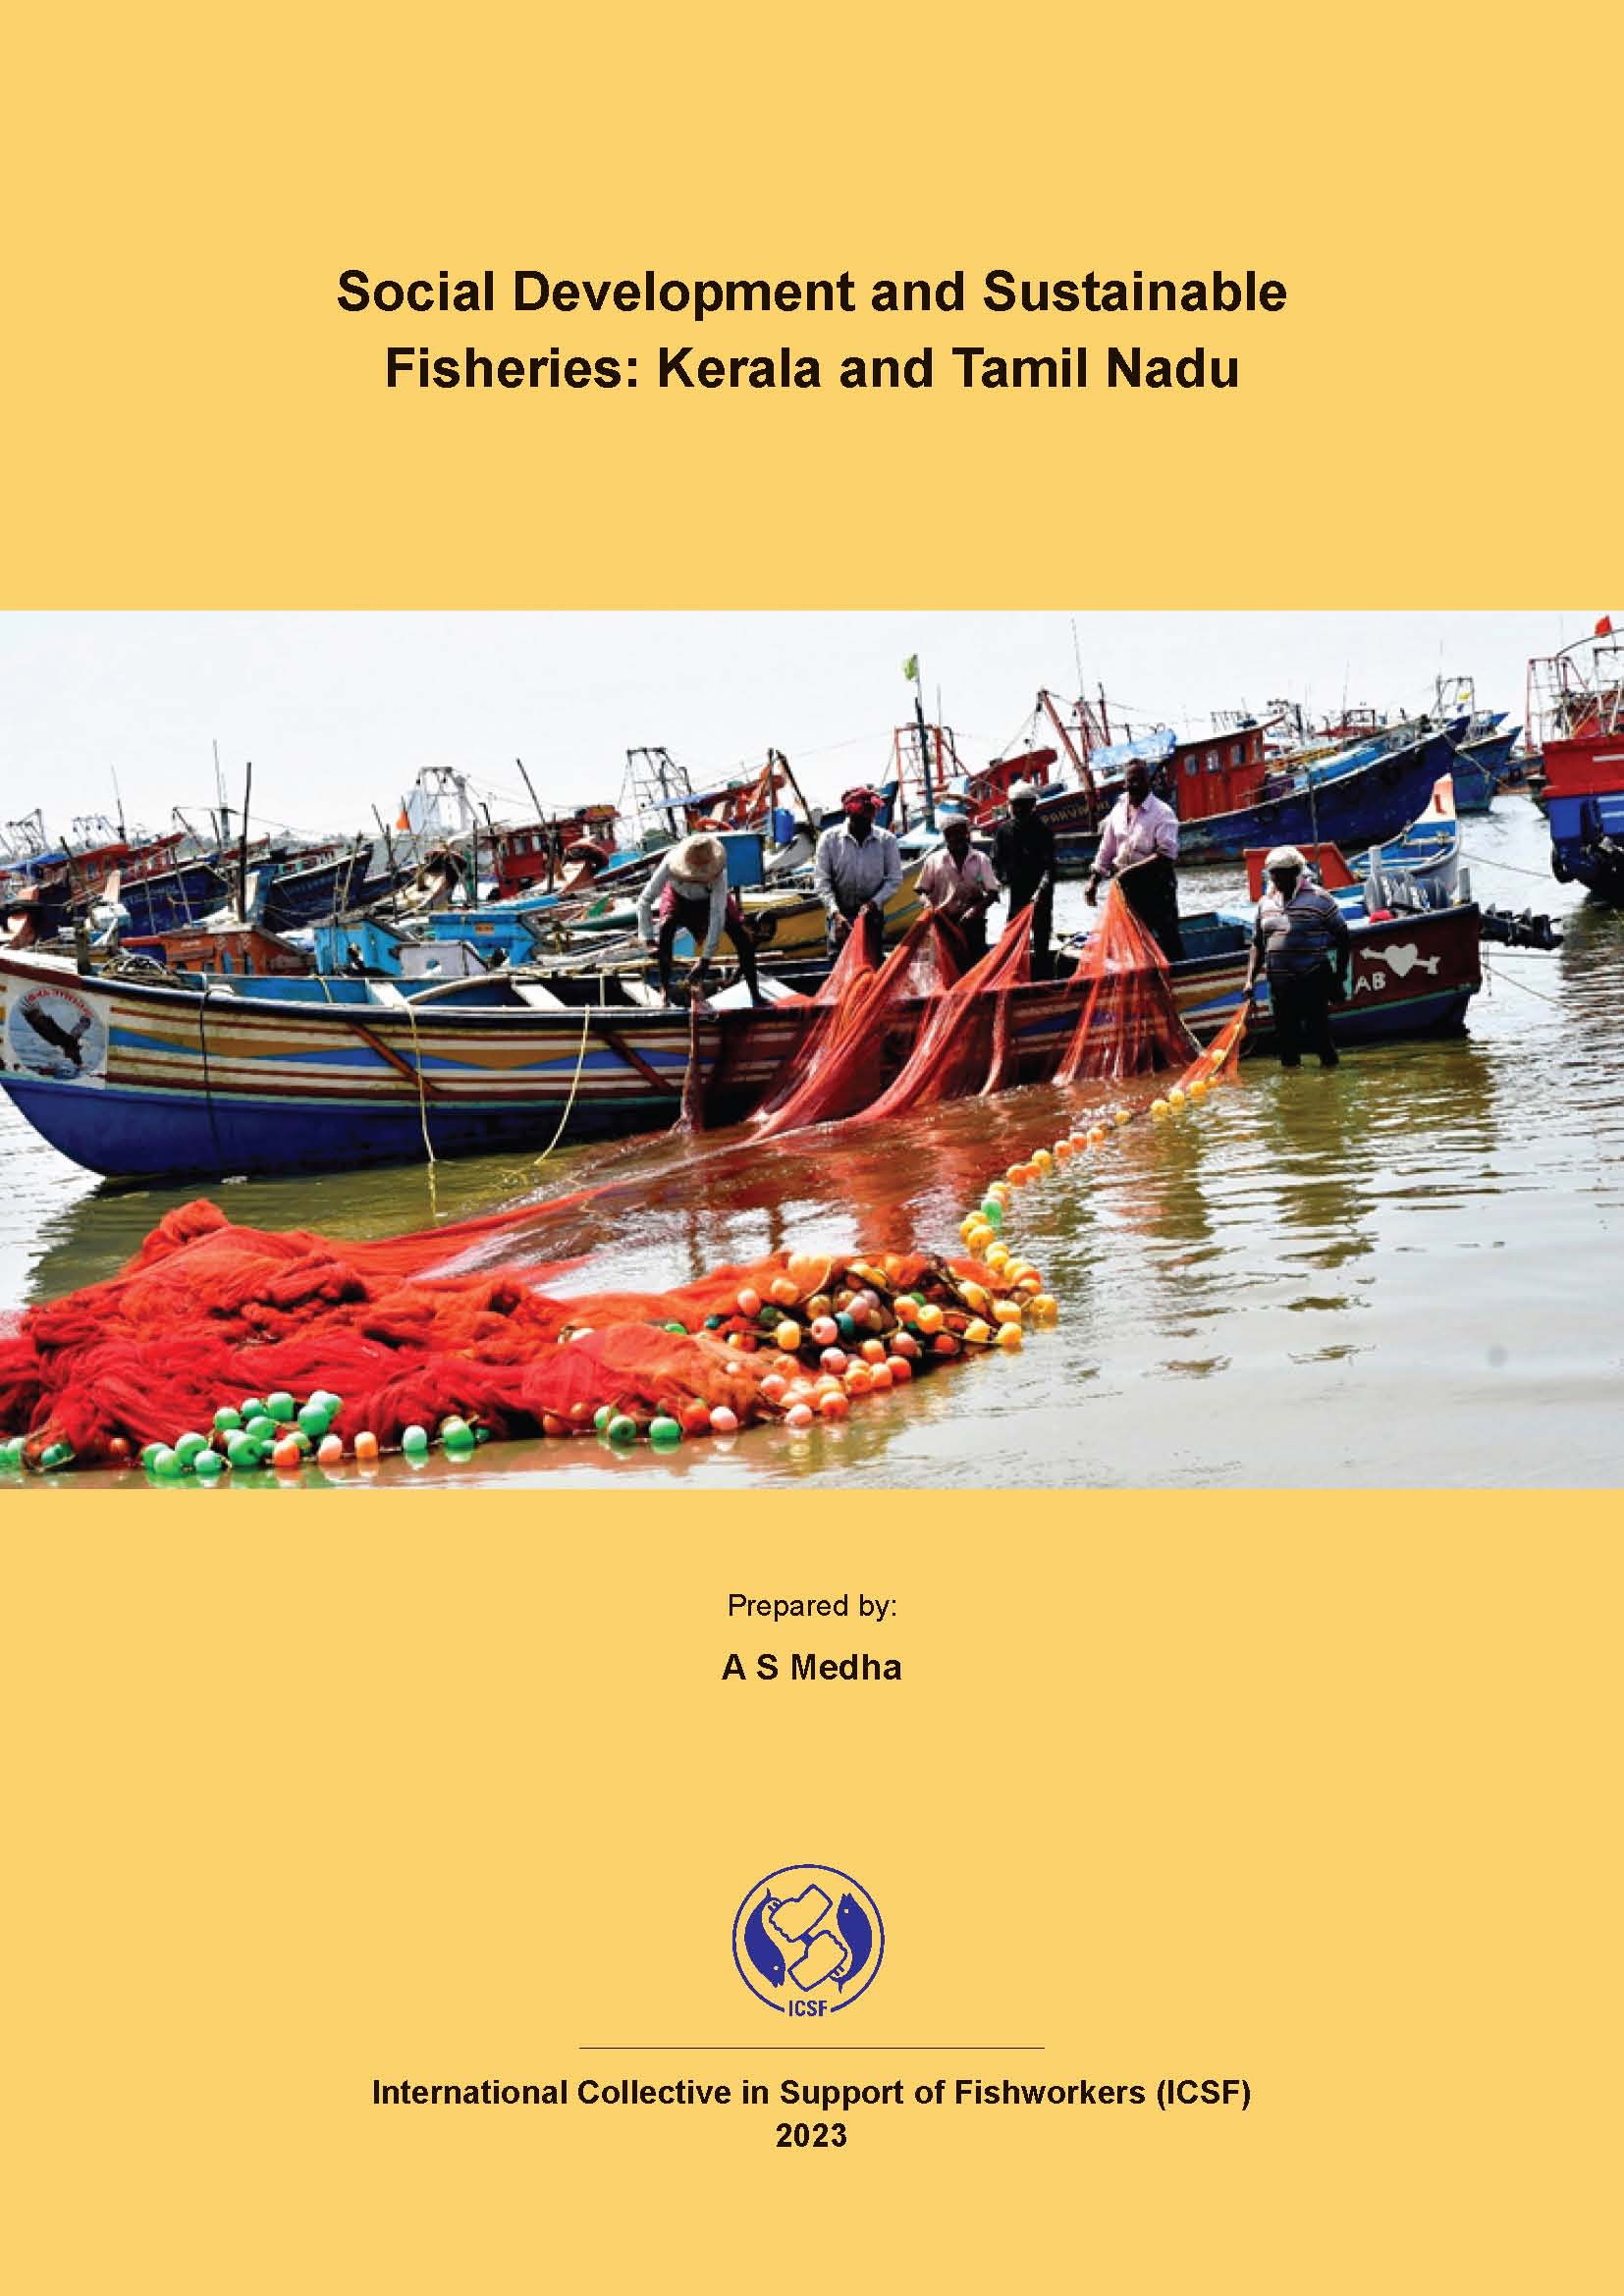 Social Development and Sustainable Fisheries: Kerala and Tamil Nadu by A S Medha